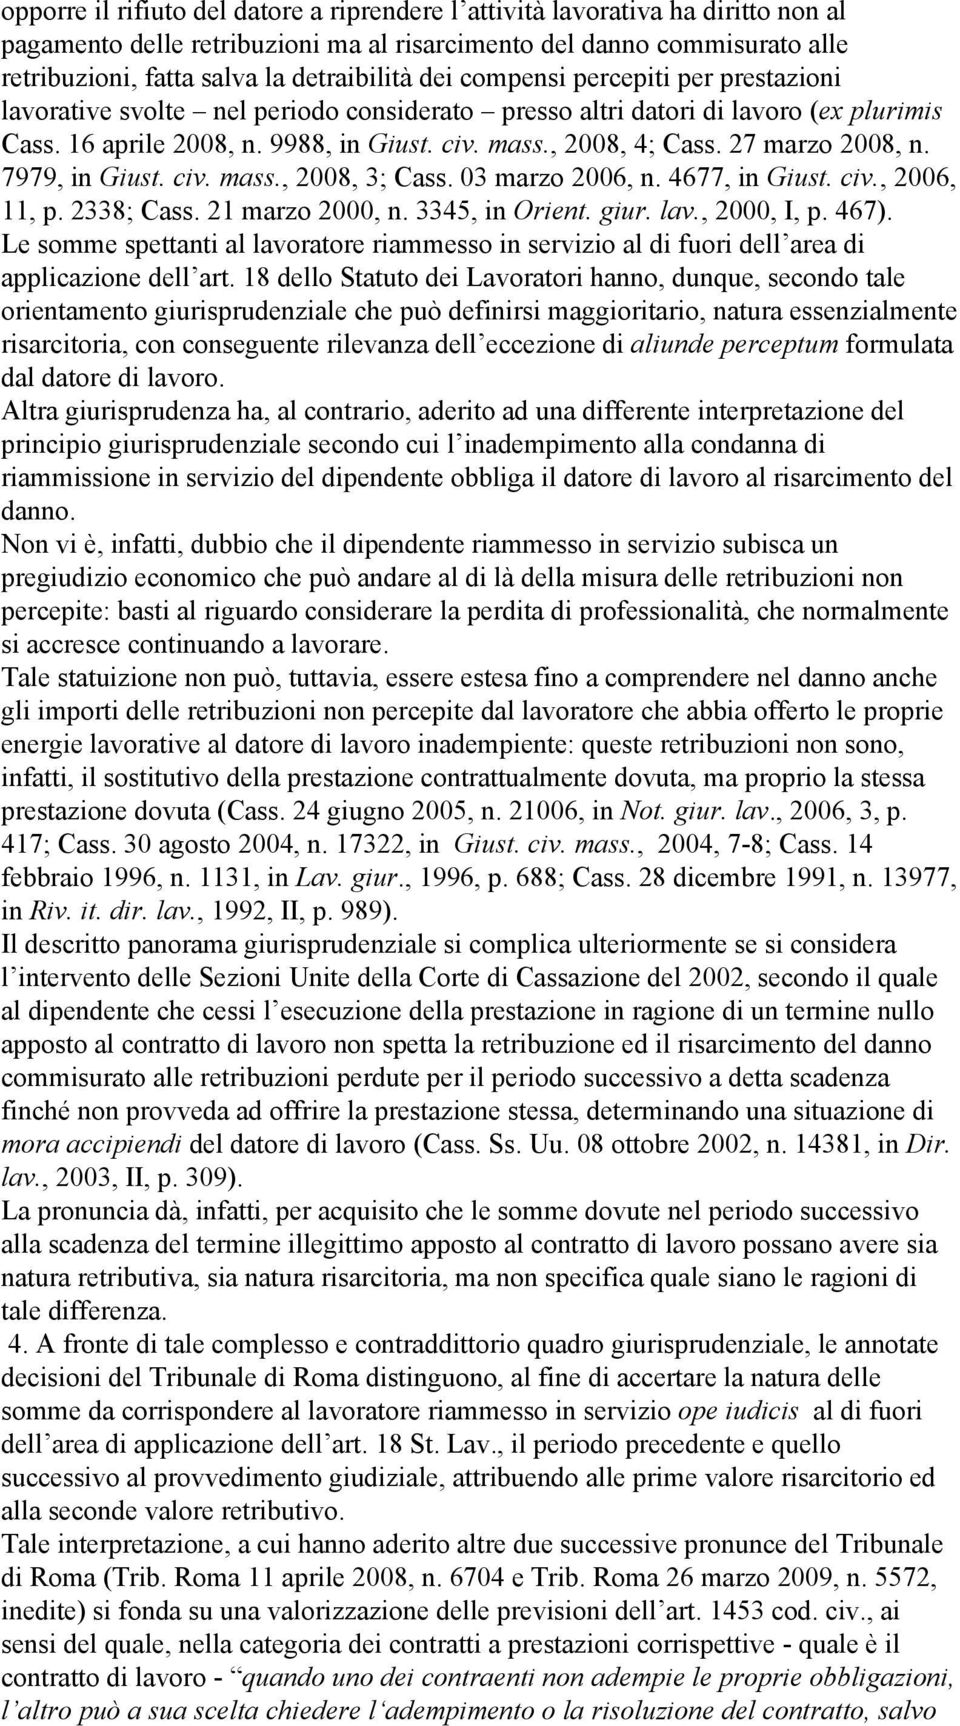 27 marzo 2008, n. 7979, in Giust. civ. mass., 2008, 3; Cass. 03 marzo 2006, n. 4677, in Giust. civ., 2006, 11, p. 2338; Cass. 21 marzo 2000, n. 3345, in Orient. giur. lav., 2000, I, p. 467).